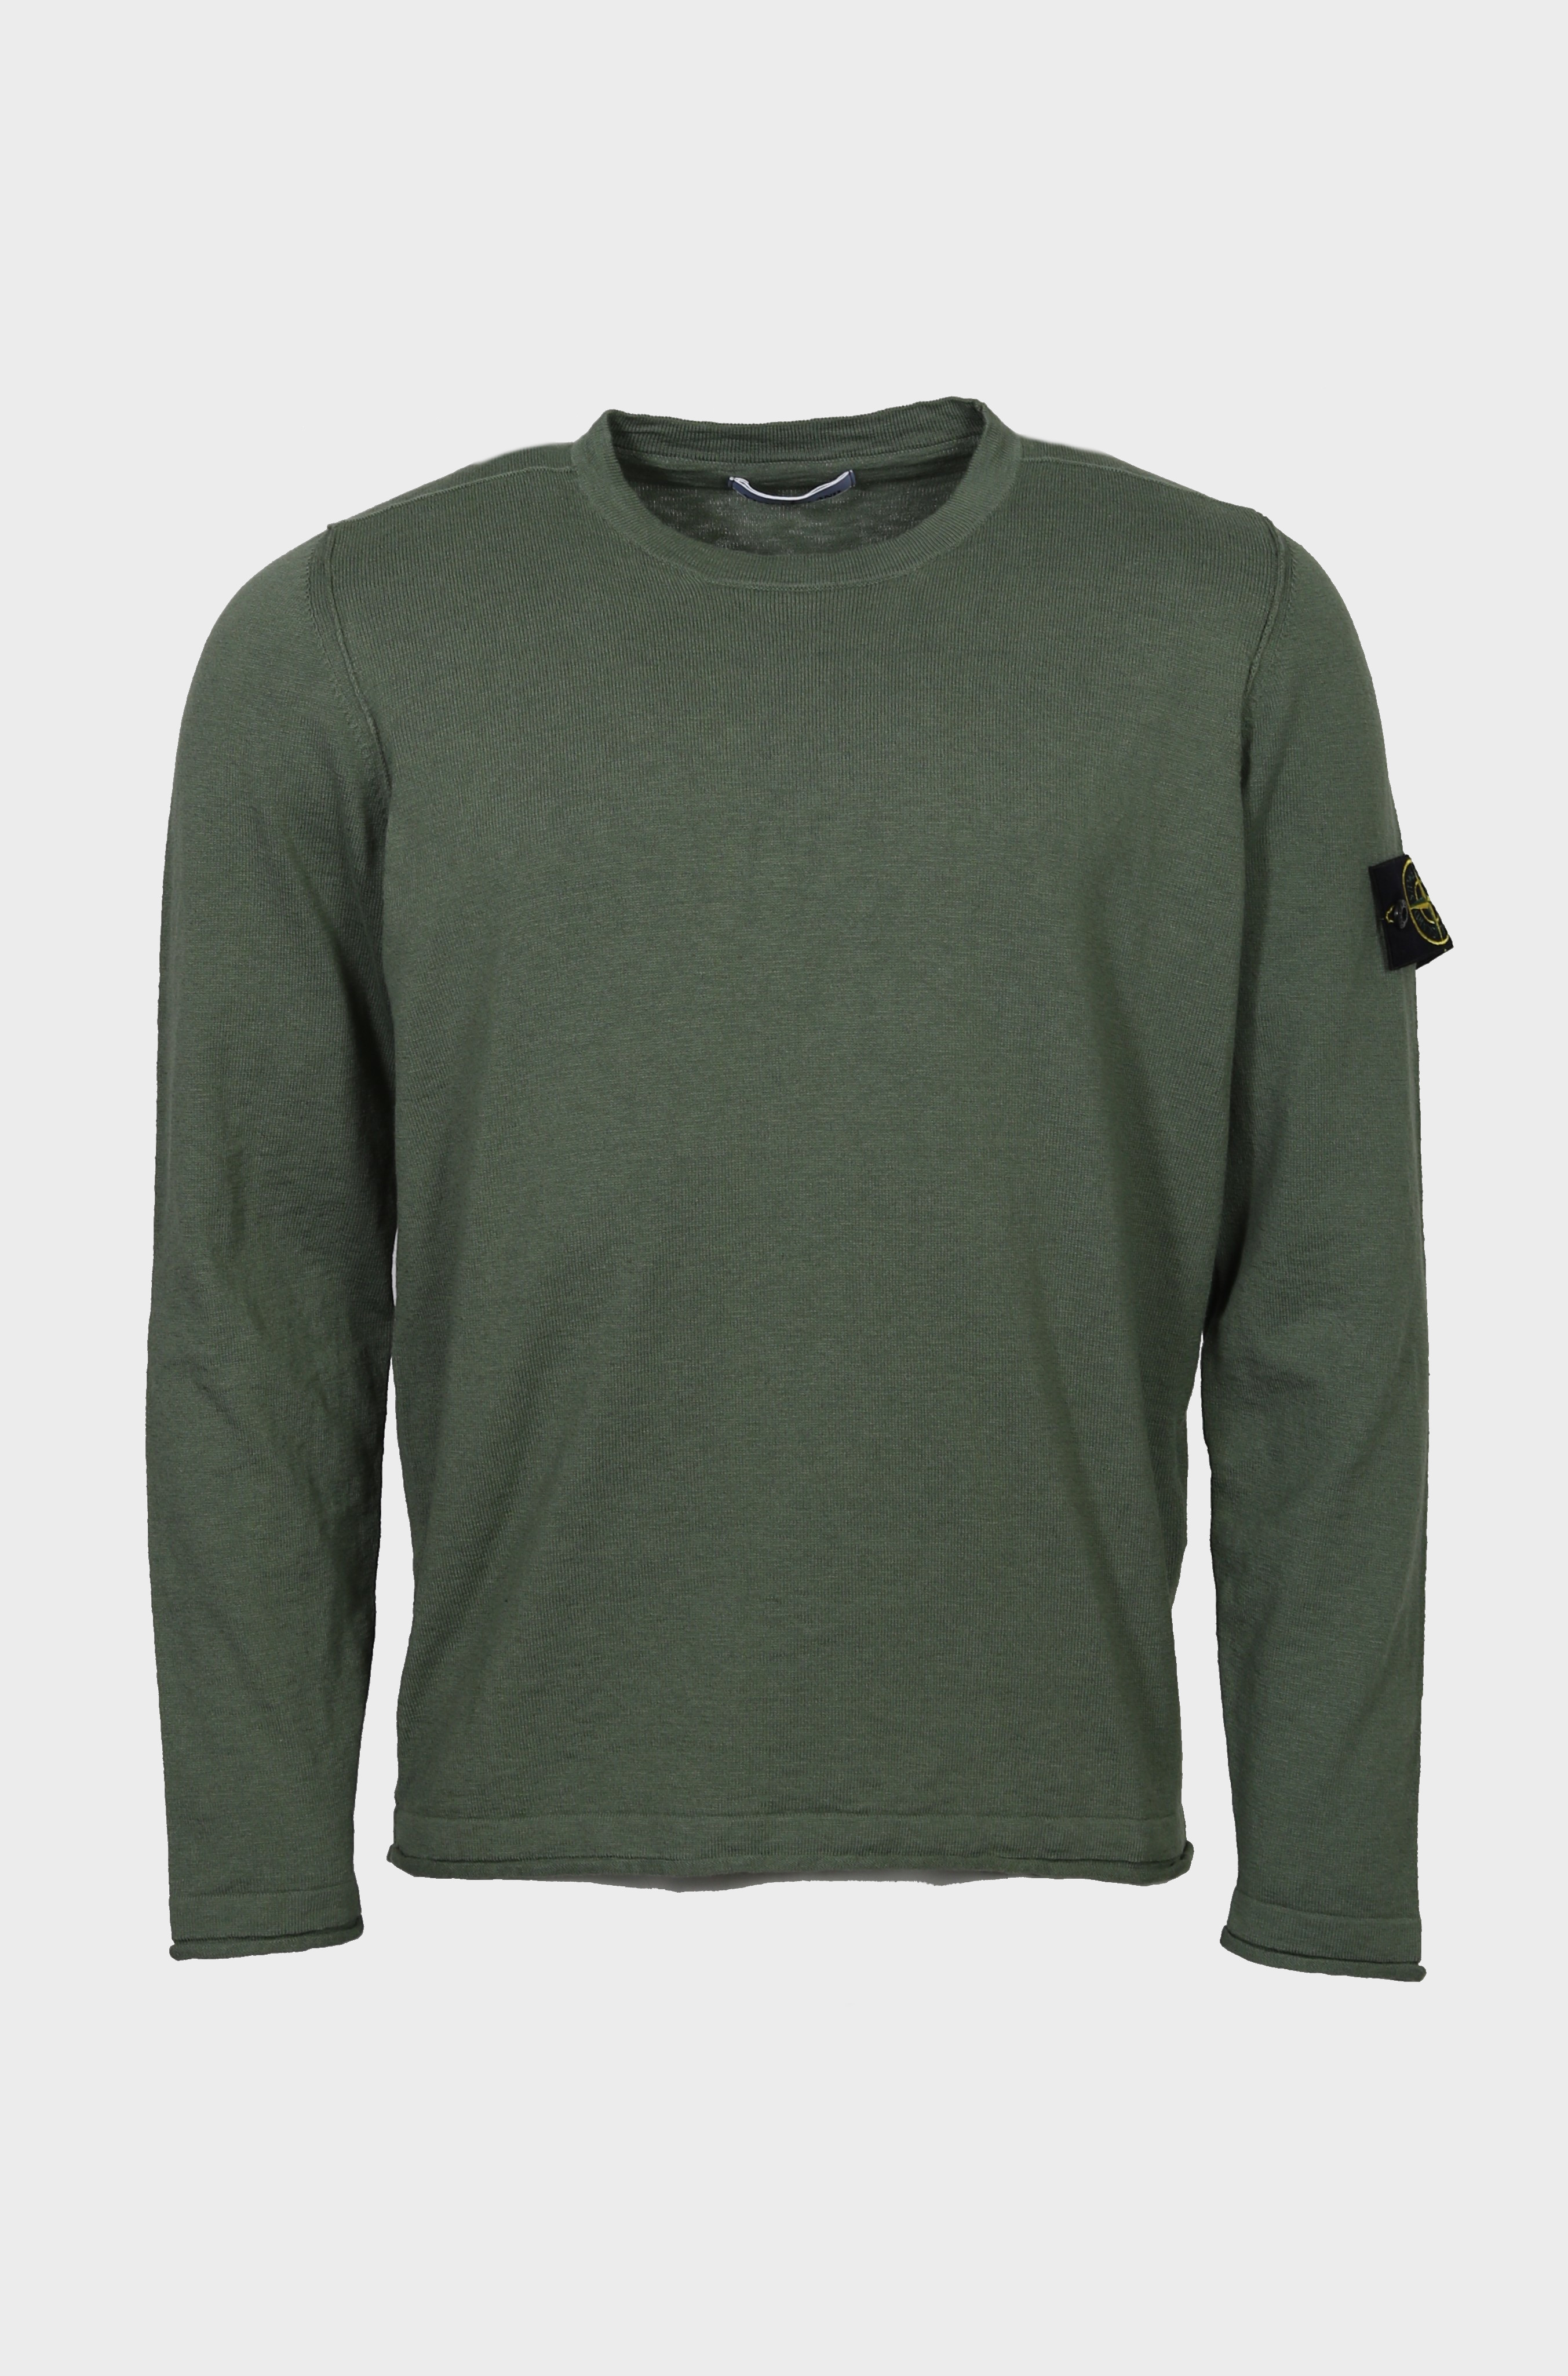 STONE ISLAND Summer Knit Pullover in Green M